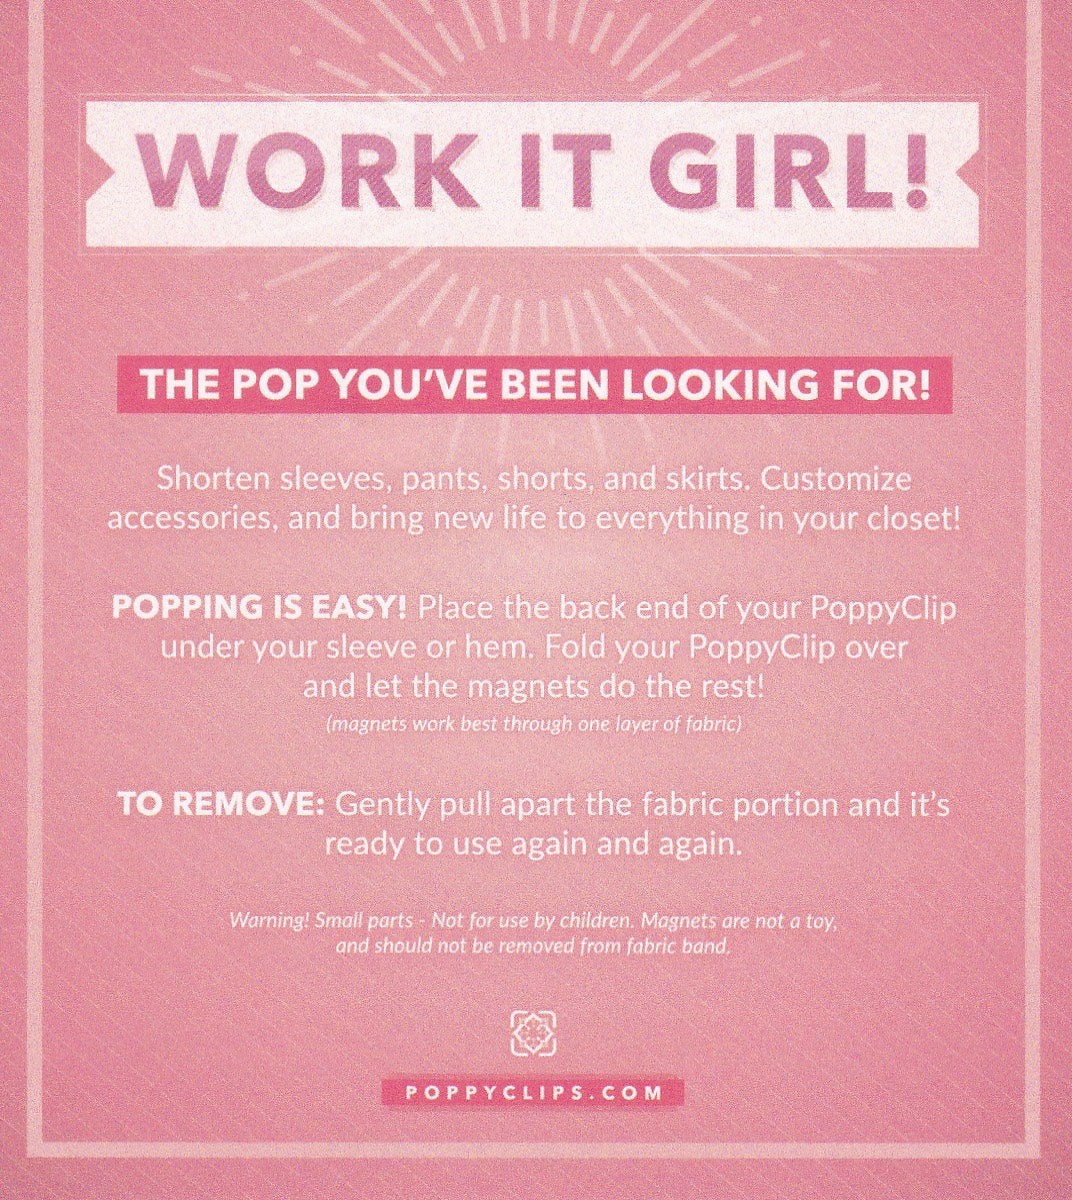 Back of Fit Clip packaging that also shows WORK IT GIRL! Below it reads: THE POP YOU’ E BEEN LOOKING FOR!   Shorten sleeves, pants, shorts, and skirts.  Customize accessories and bring new life to everything in your closet!    POPPING IS EASY!  Place the back end of your Poppyclip under your sleeve or hem.  Fold Poppyclip over and let the magnet do the rest!  TO REMOVE: Gently pull apart the fabric portion and it’s ready to use again and again.  Warning: Small parts – not for use by children.  